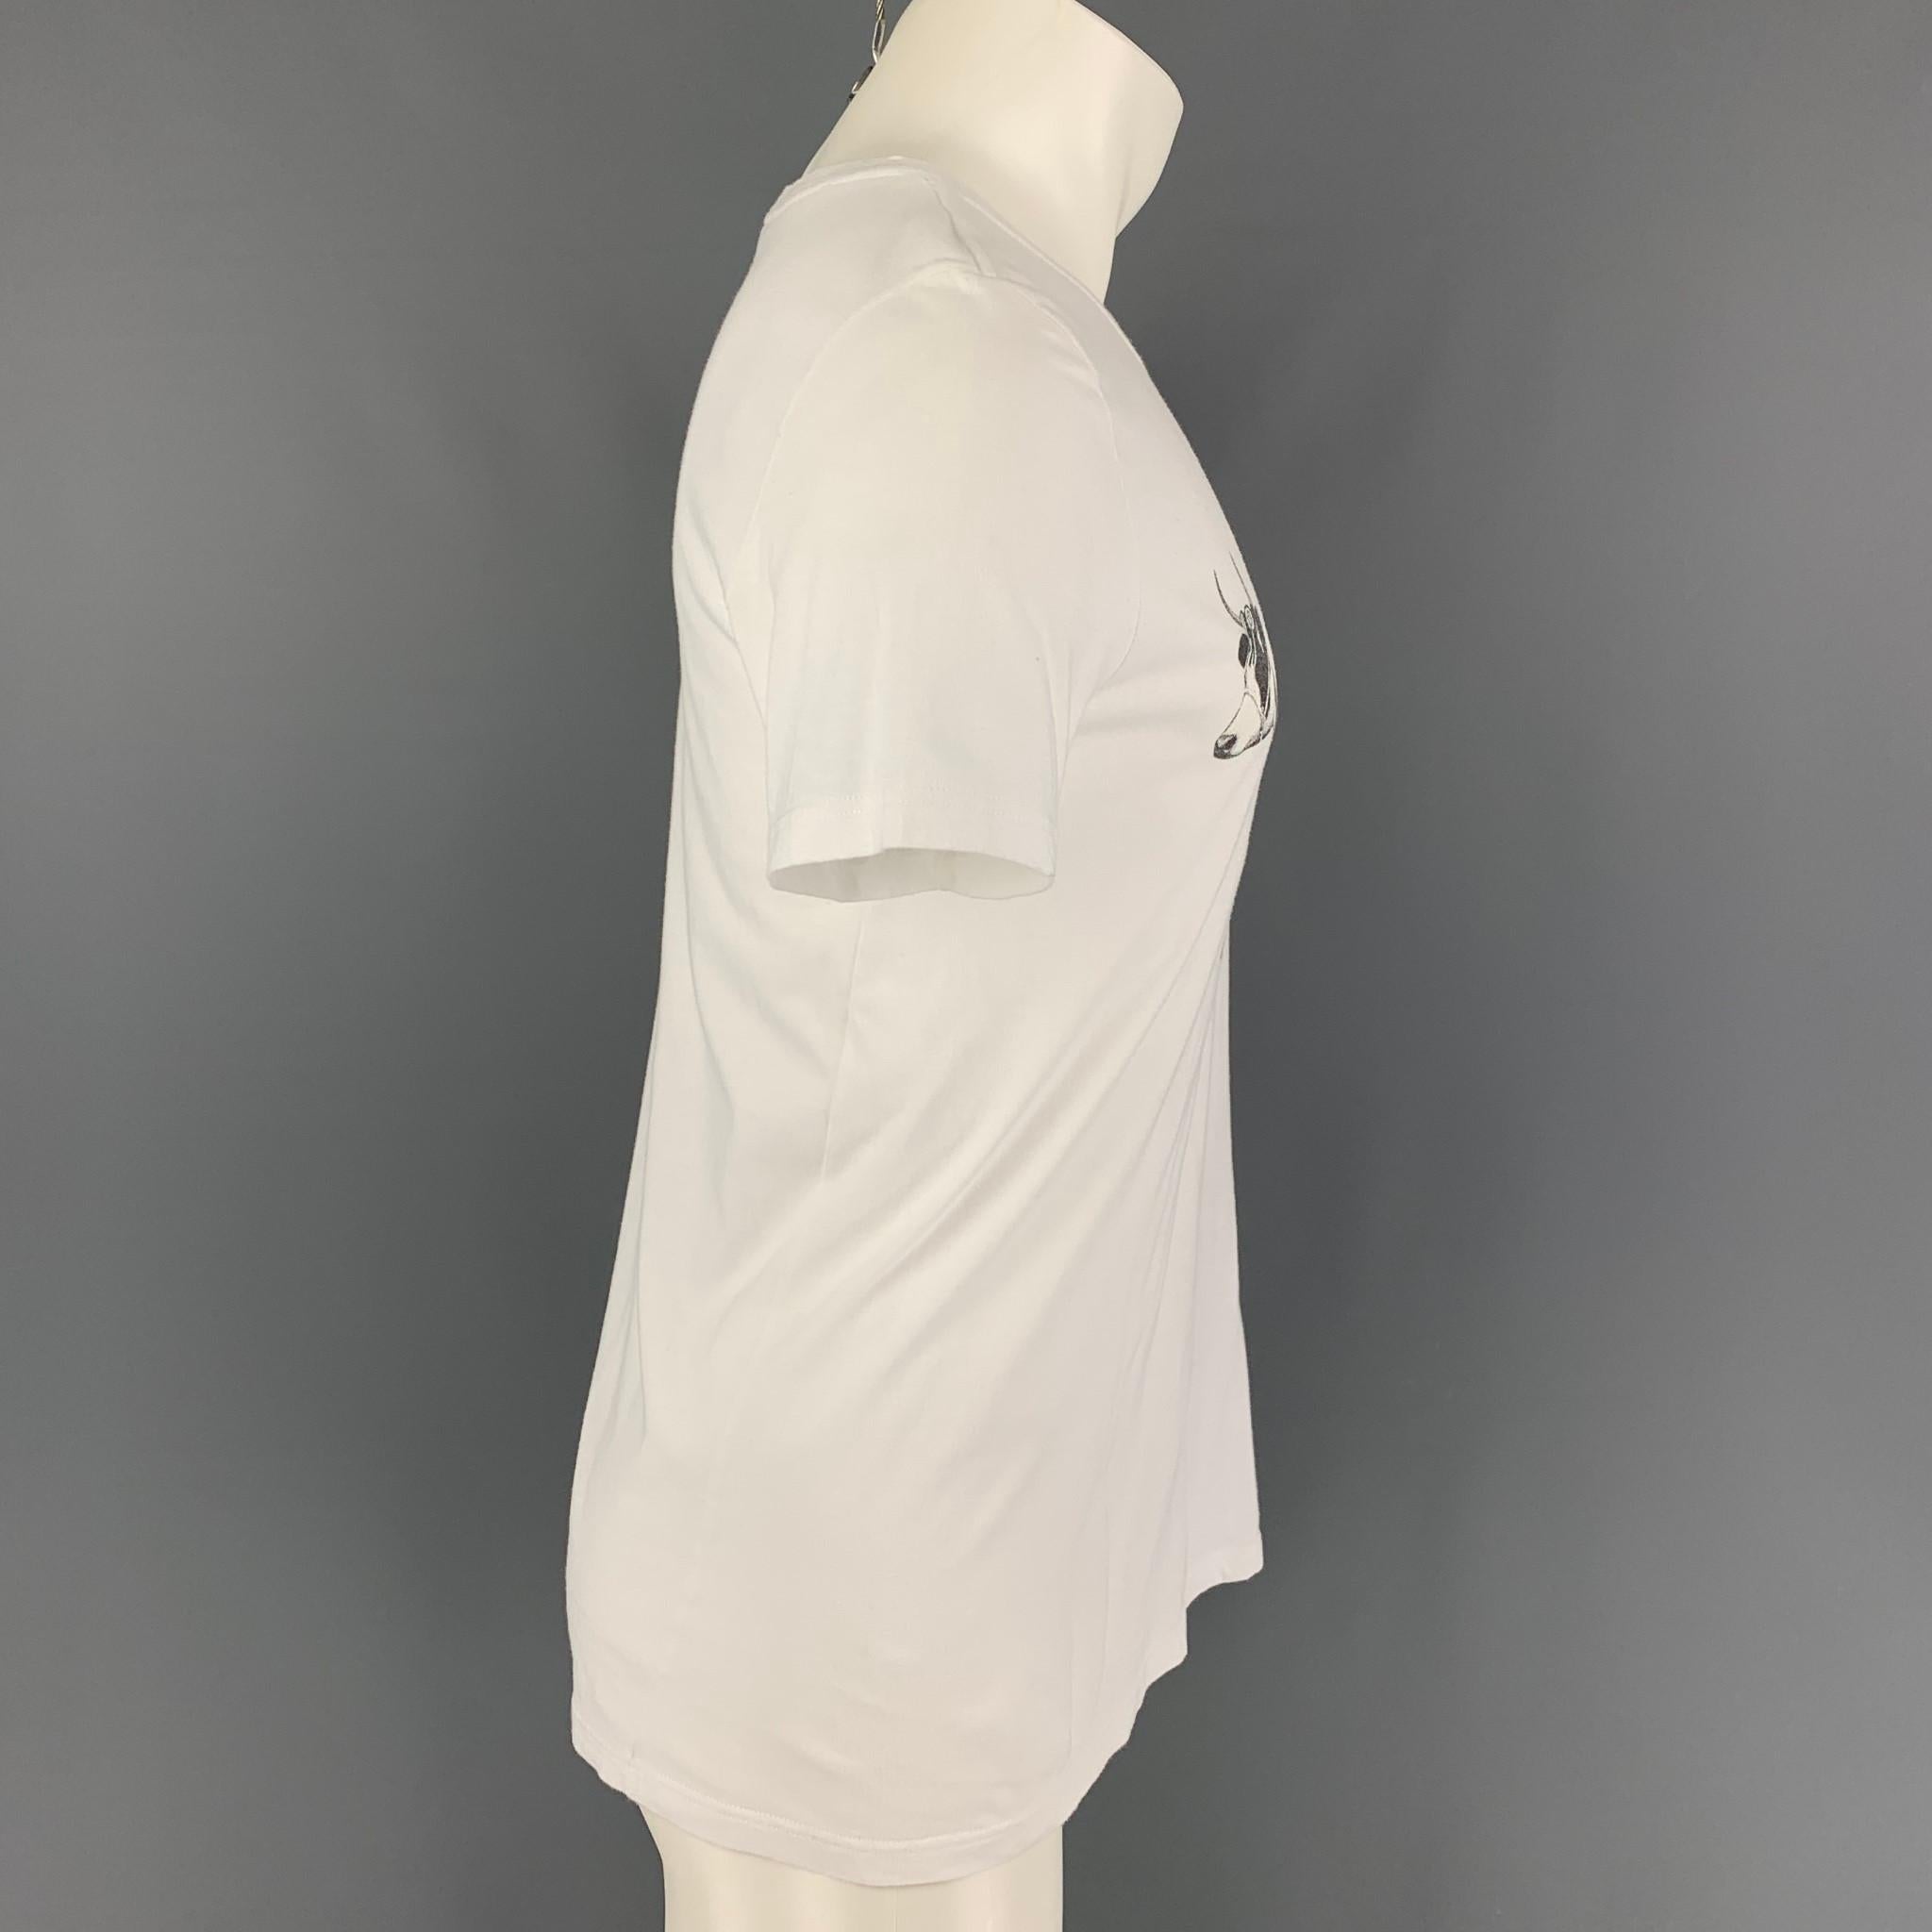 BURBERRY PRORSUM SS 11 comes in a white cotton featuring a 'Prize Cow' graphic and a crew-neck. Made in Italy. 

Very Good Pre-Owned Condition.
Marked: M

Measurements:

Shoulder: 18 in.
Chest: 38 in.
Sleeve: 8 in.
Length: 26 in. 